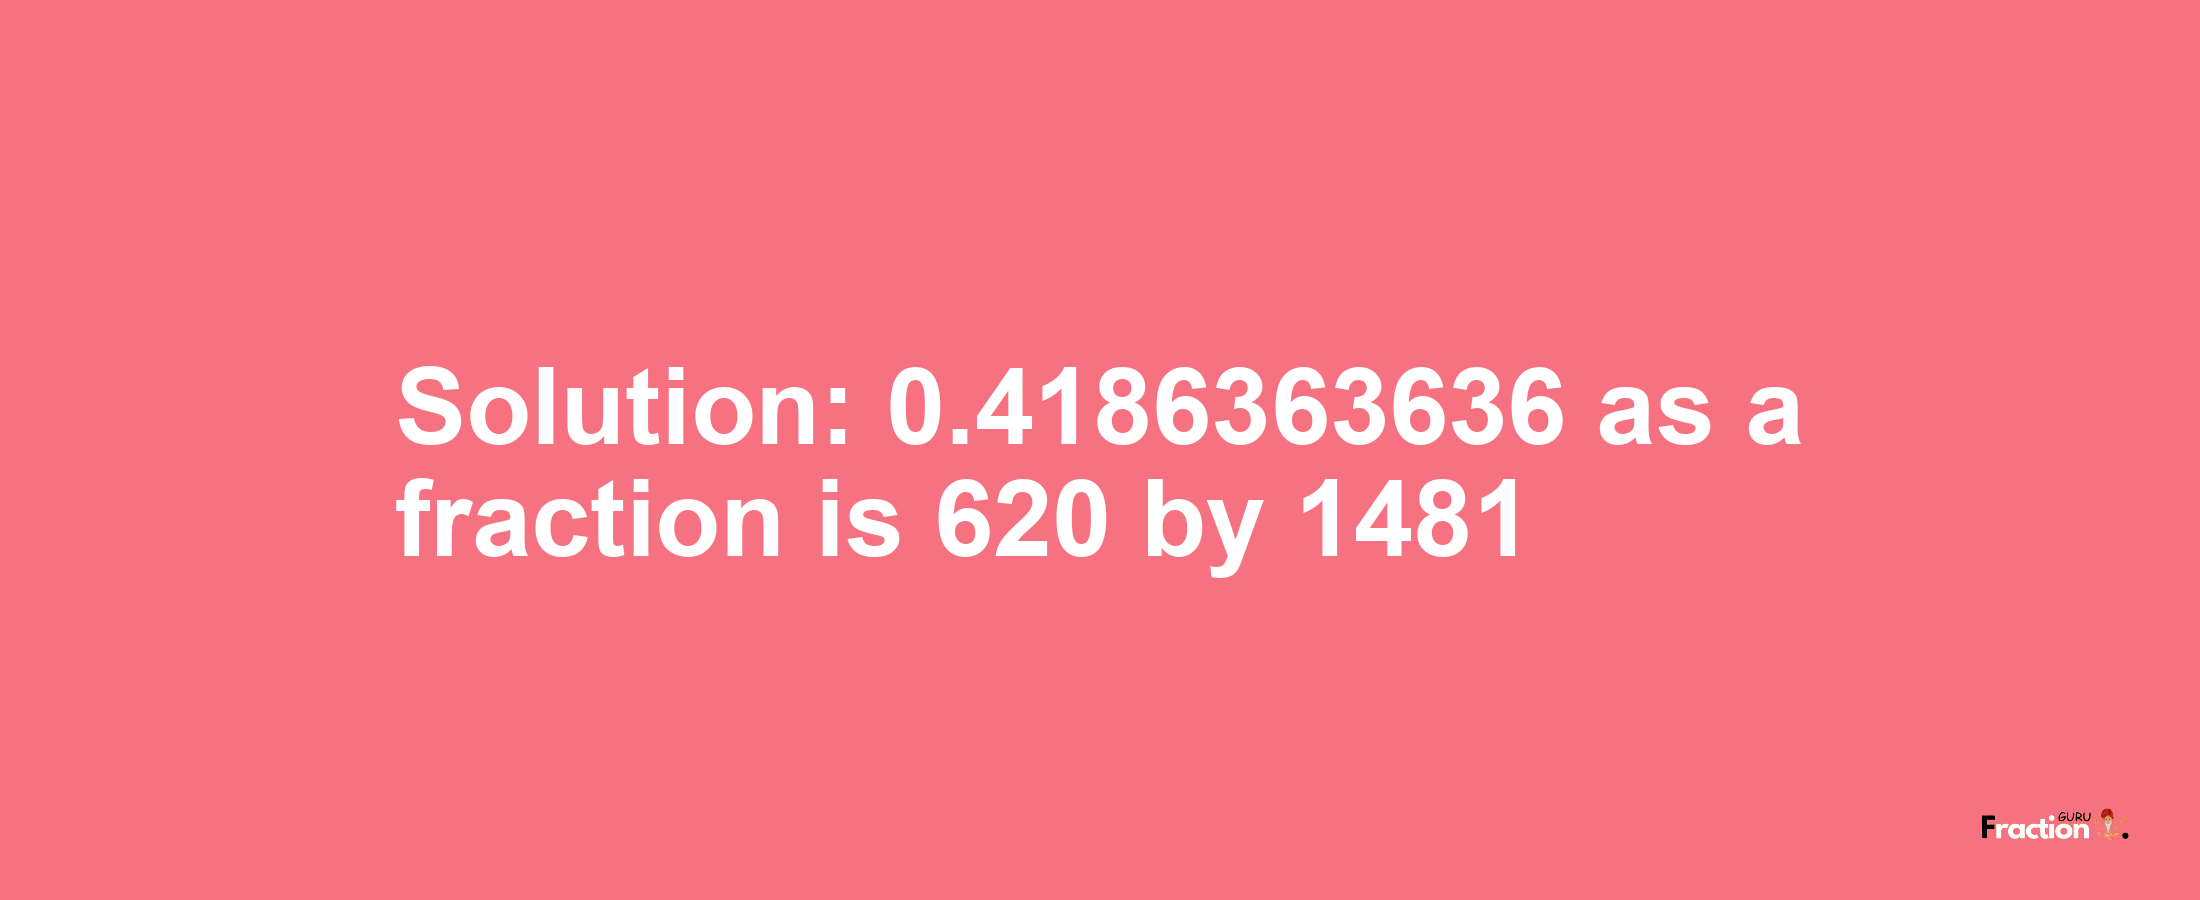 Solution:0.4186363636 as a fraction is 620/1481